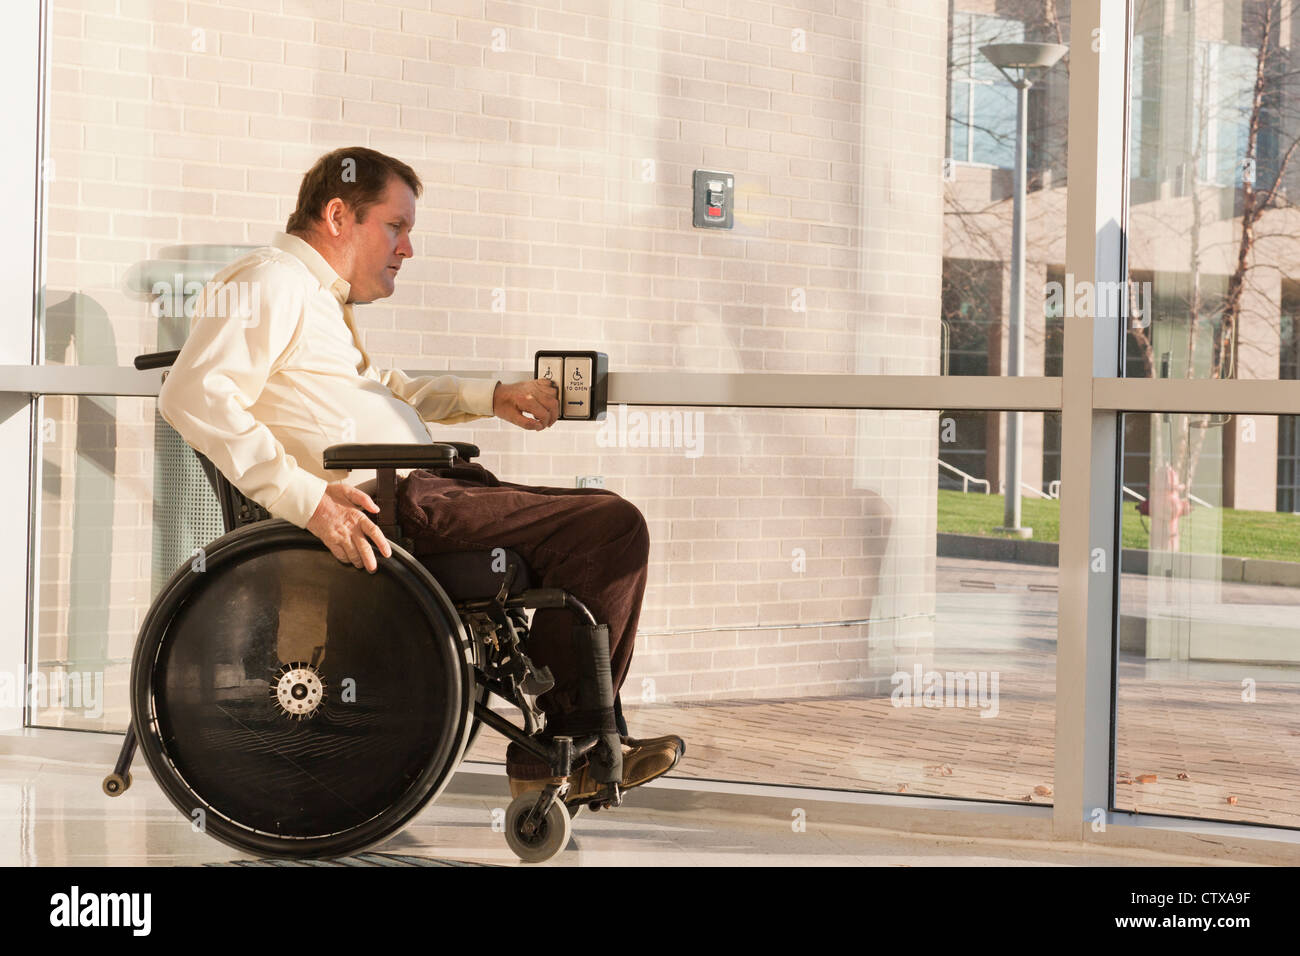 Businessman with spinal cord injury in wheelchair using automatic door